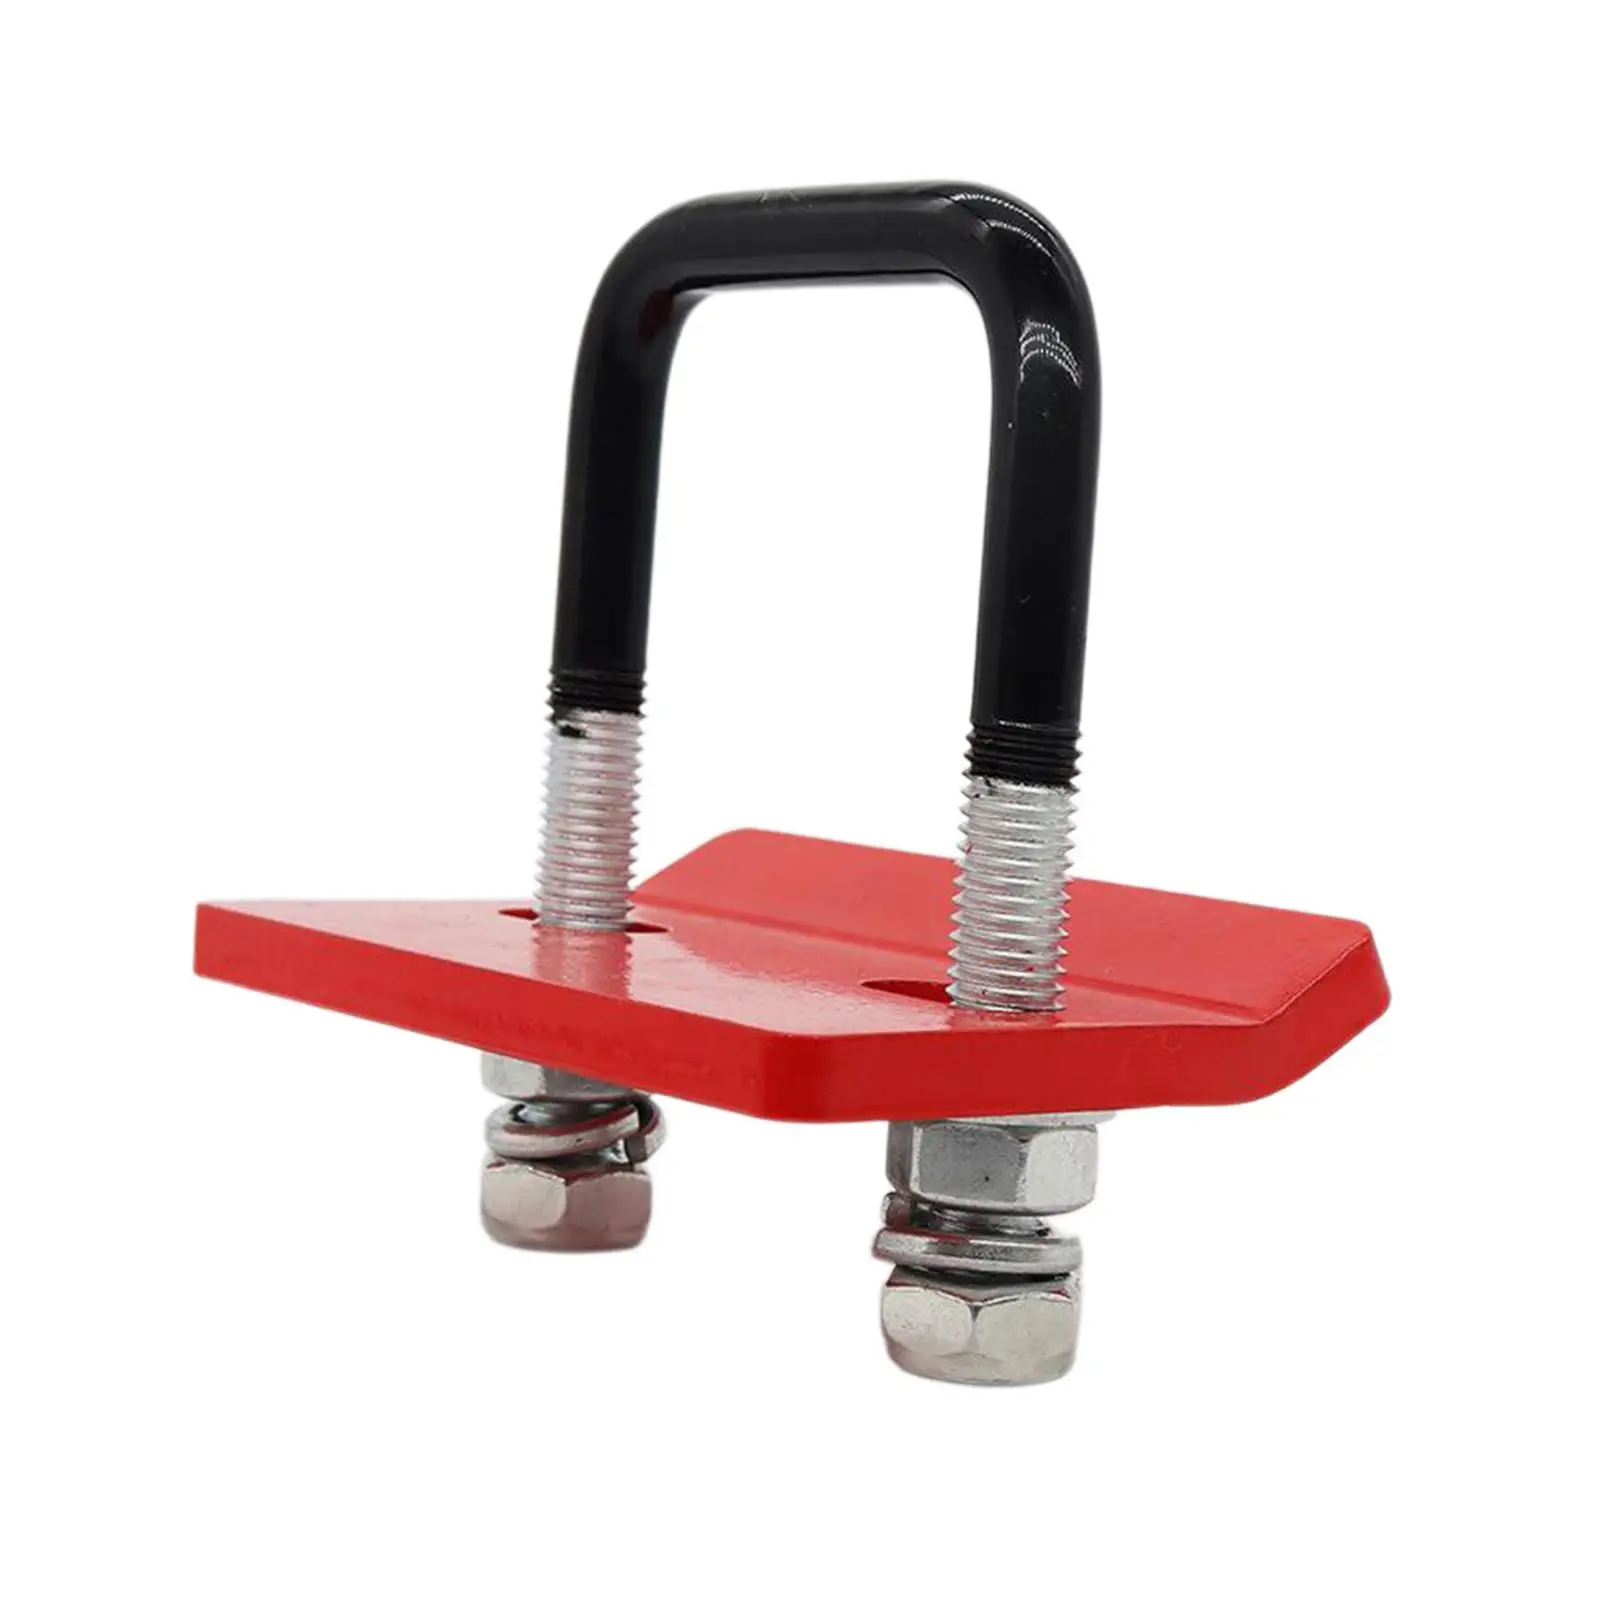 Alloy Steel Hitch Tightener Trailer Hitches Clamp for Trailer Boat Bike Rack